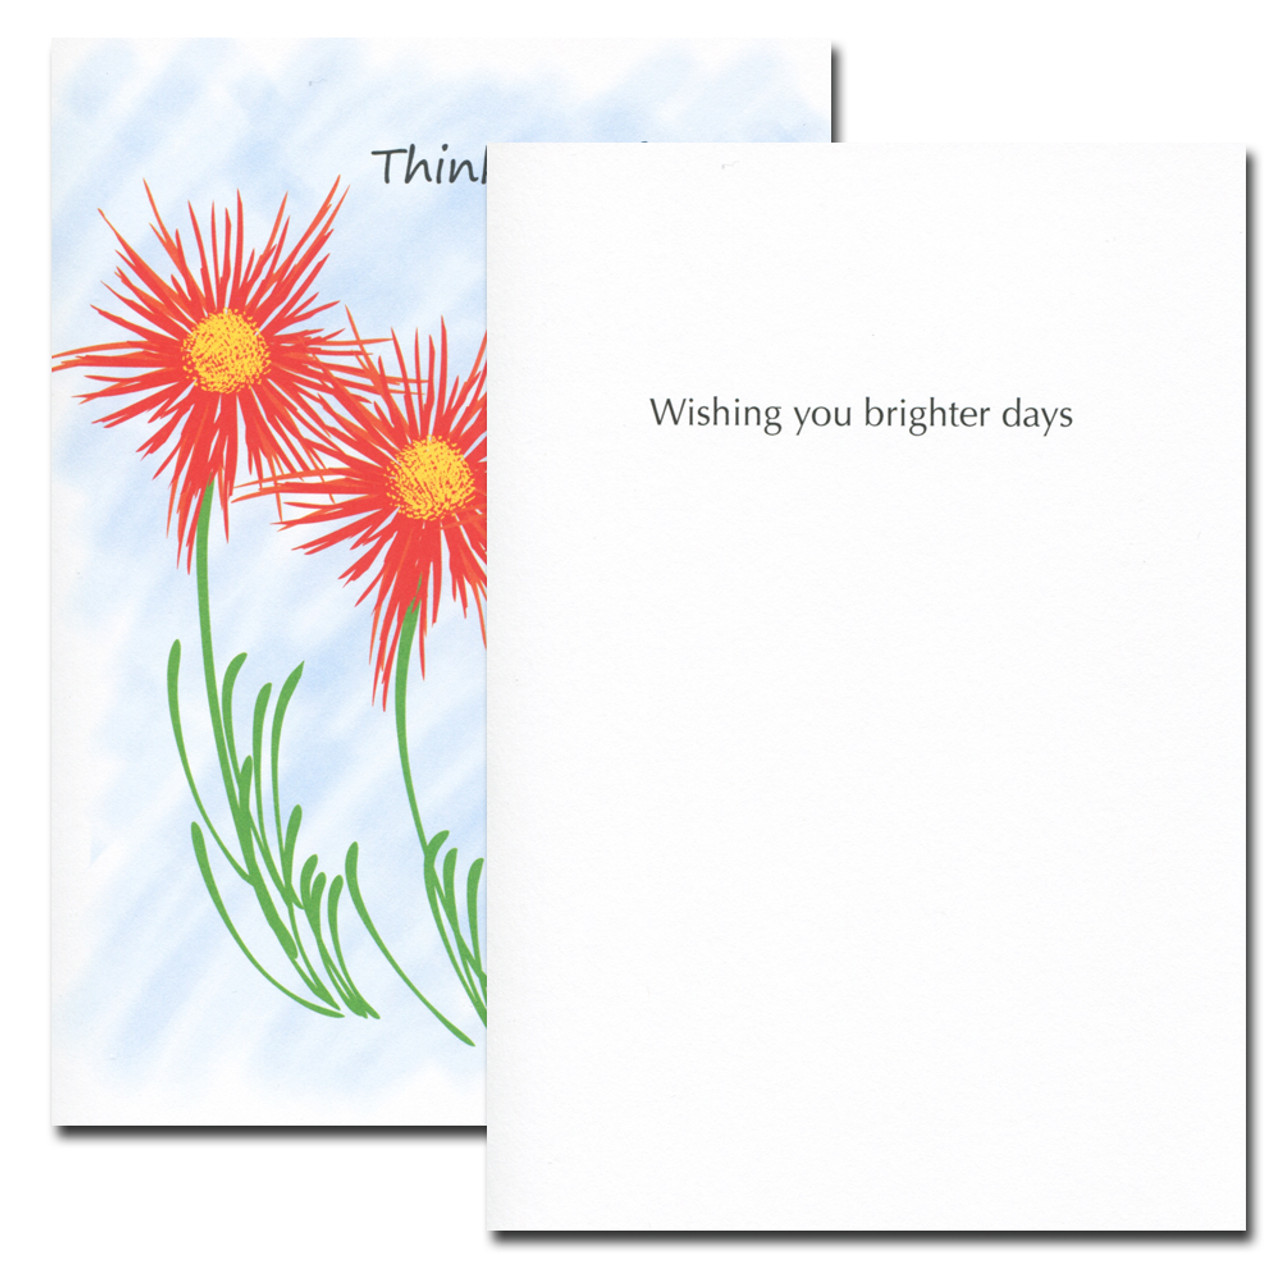 Brighter Days card inside reads: Wishing you brighter days